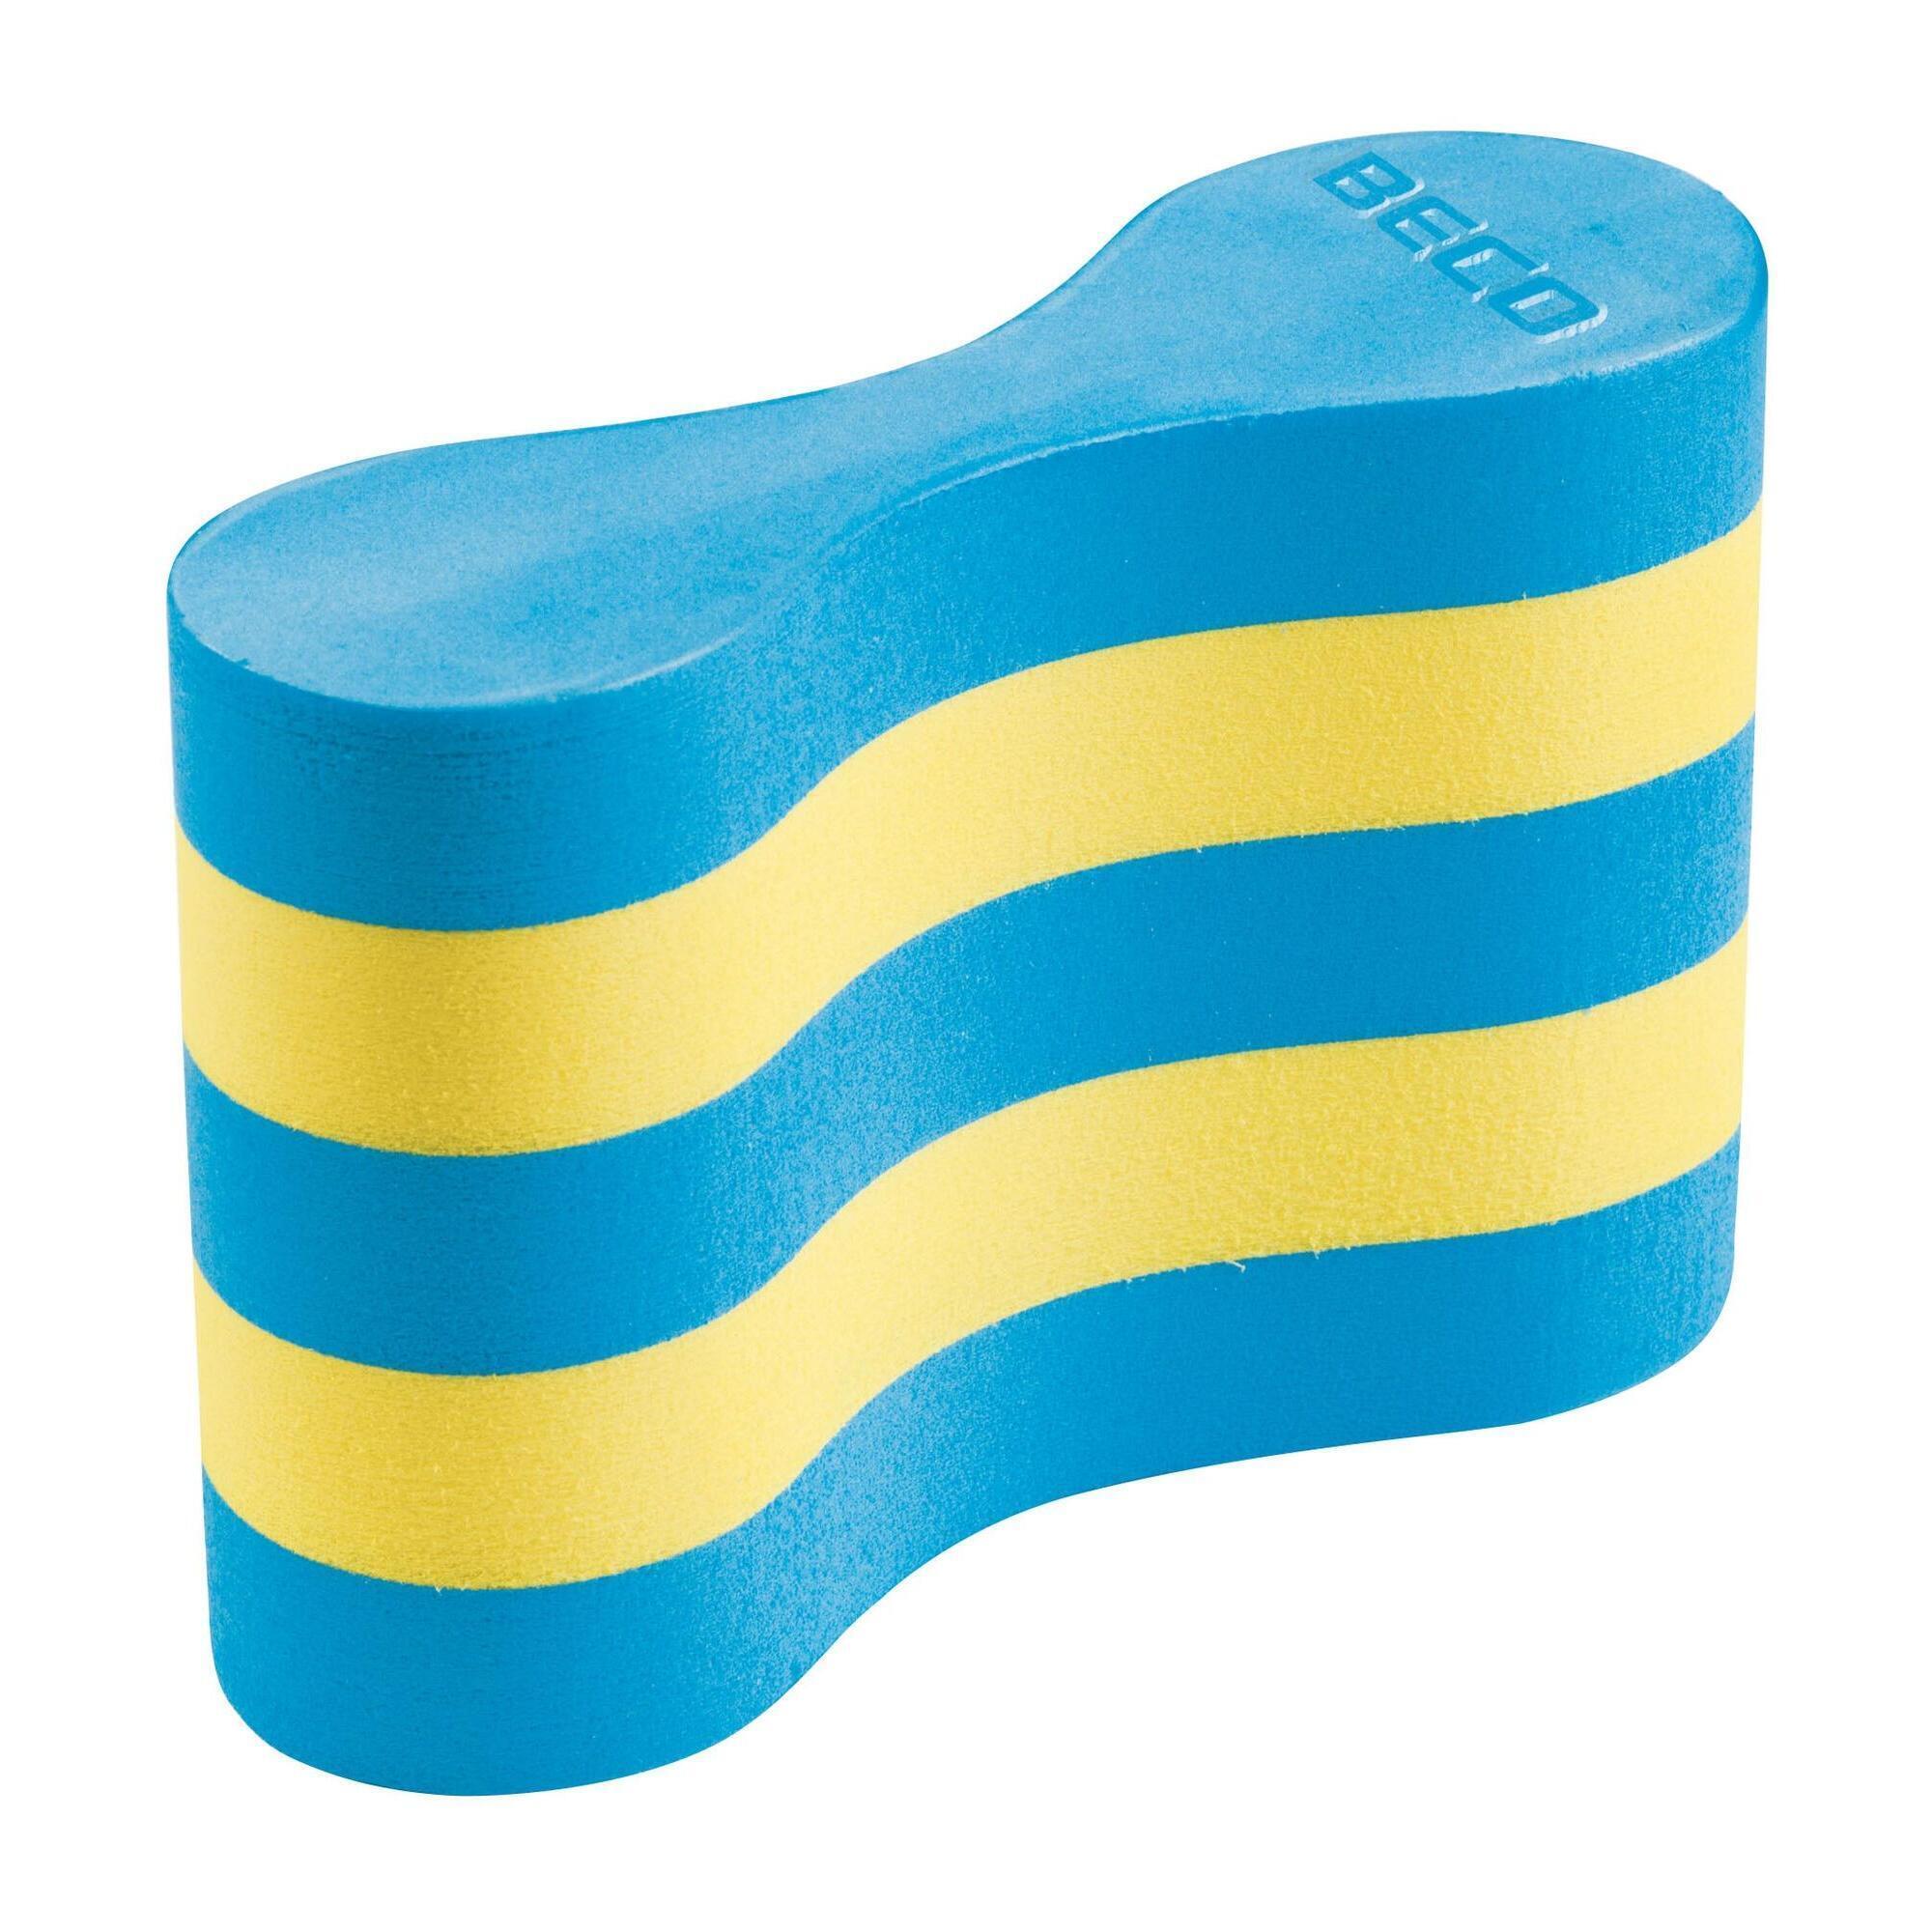 BECO BECO Pull Buoy Large - Blue/Yellow